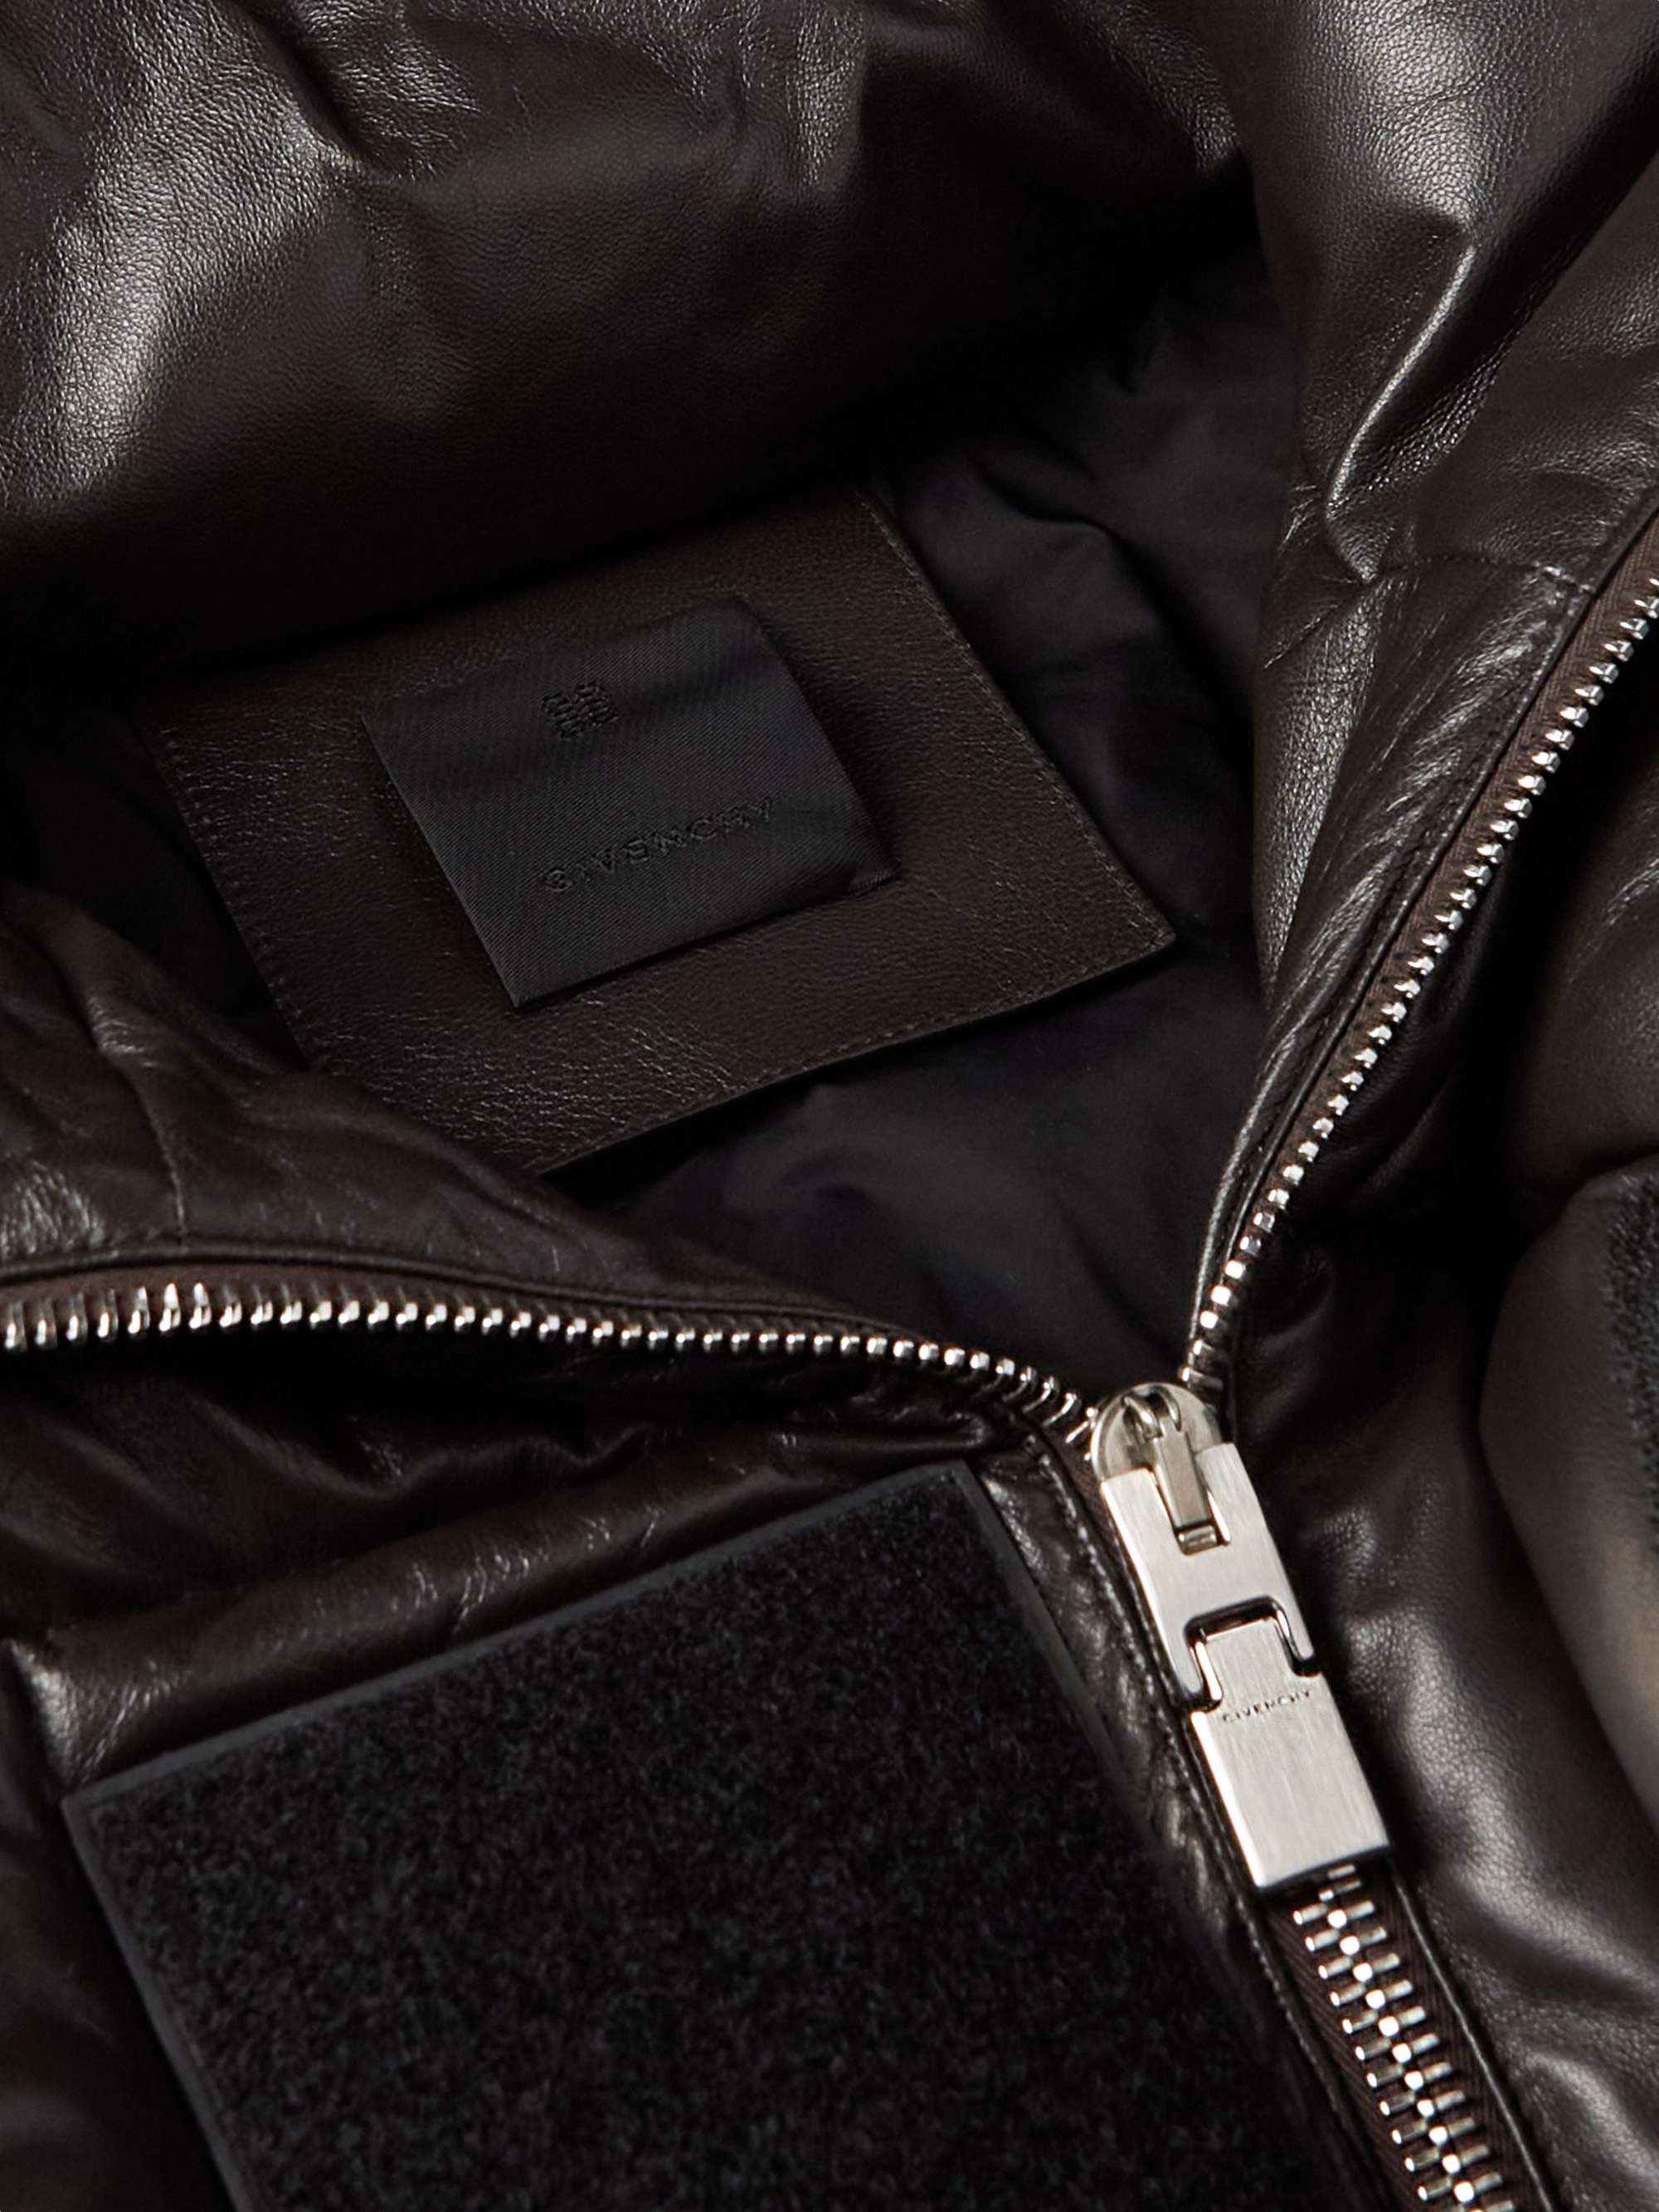 GIVENCHY Oversized Quilted Leather Down Jacket